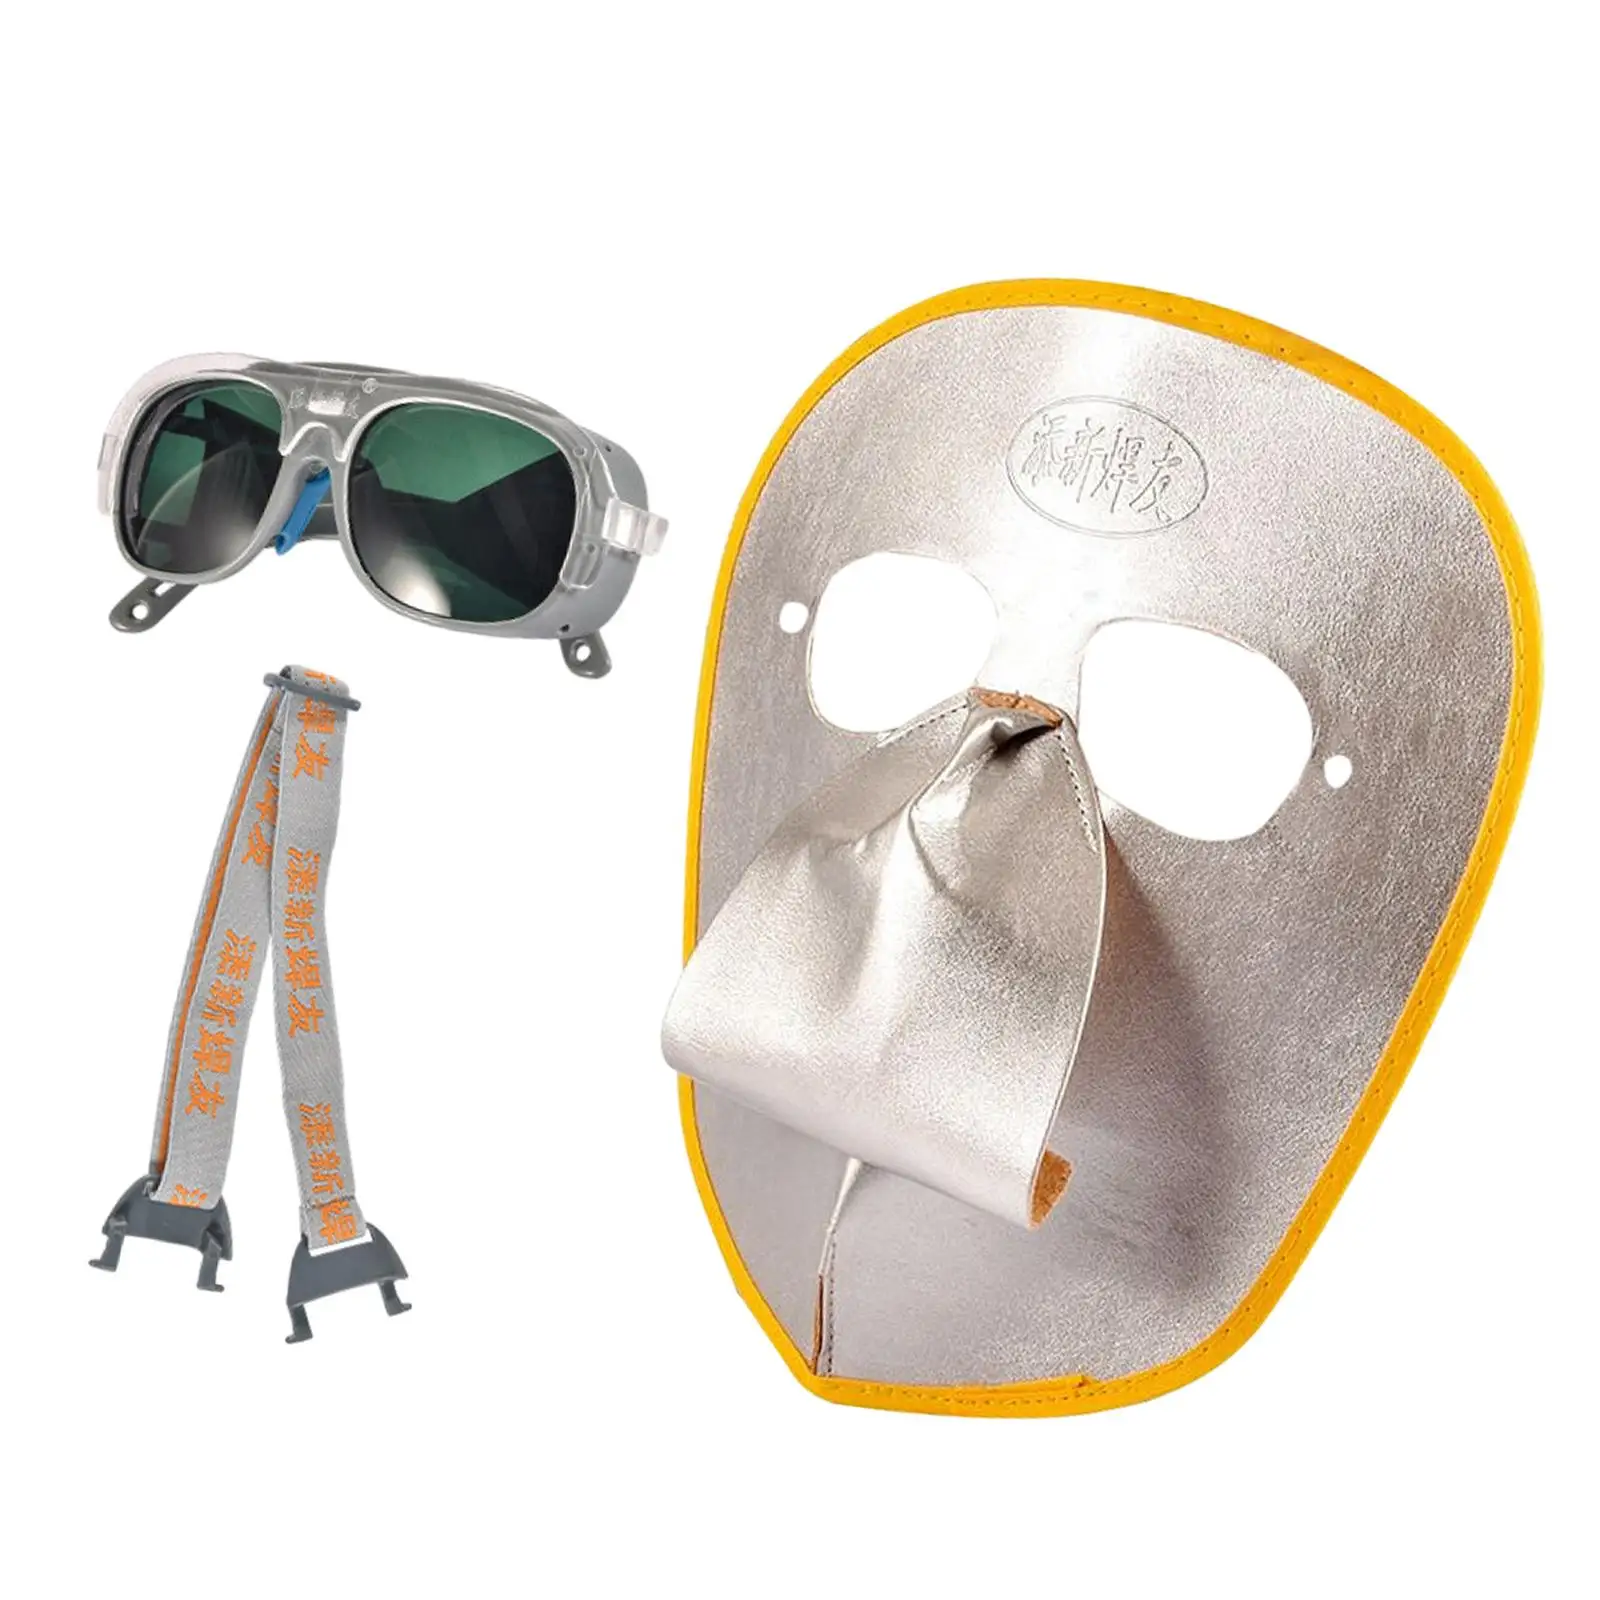 Welding Face Protection Set Heat Insulation Leather Welding Mask and Welding Goggles for Metal Casting Cutting Welding Workers